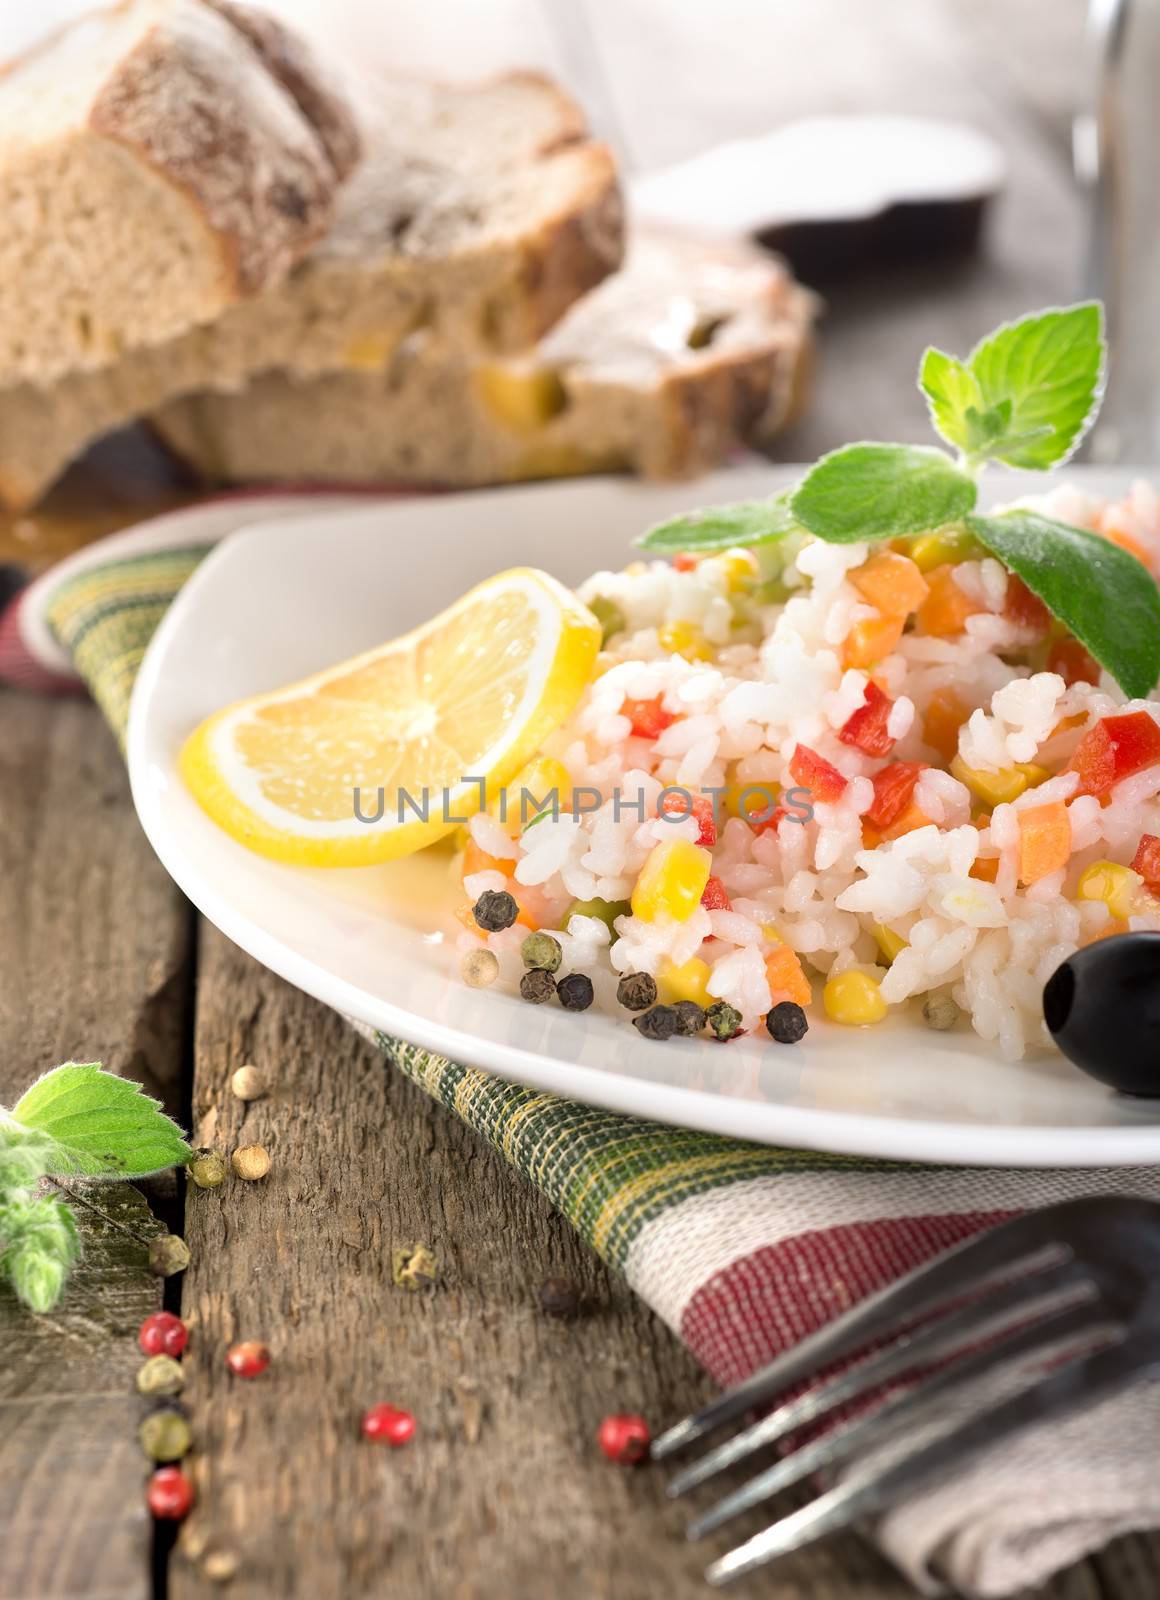 Rice, vegetables and bread on a wooden table